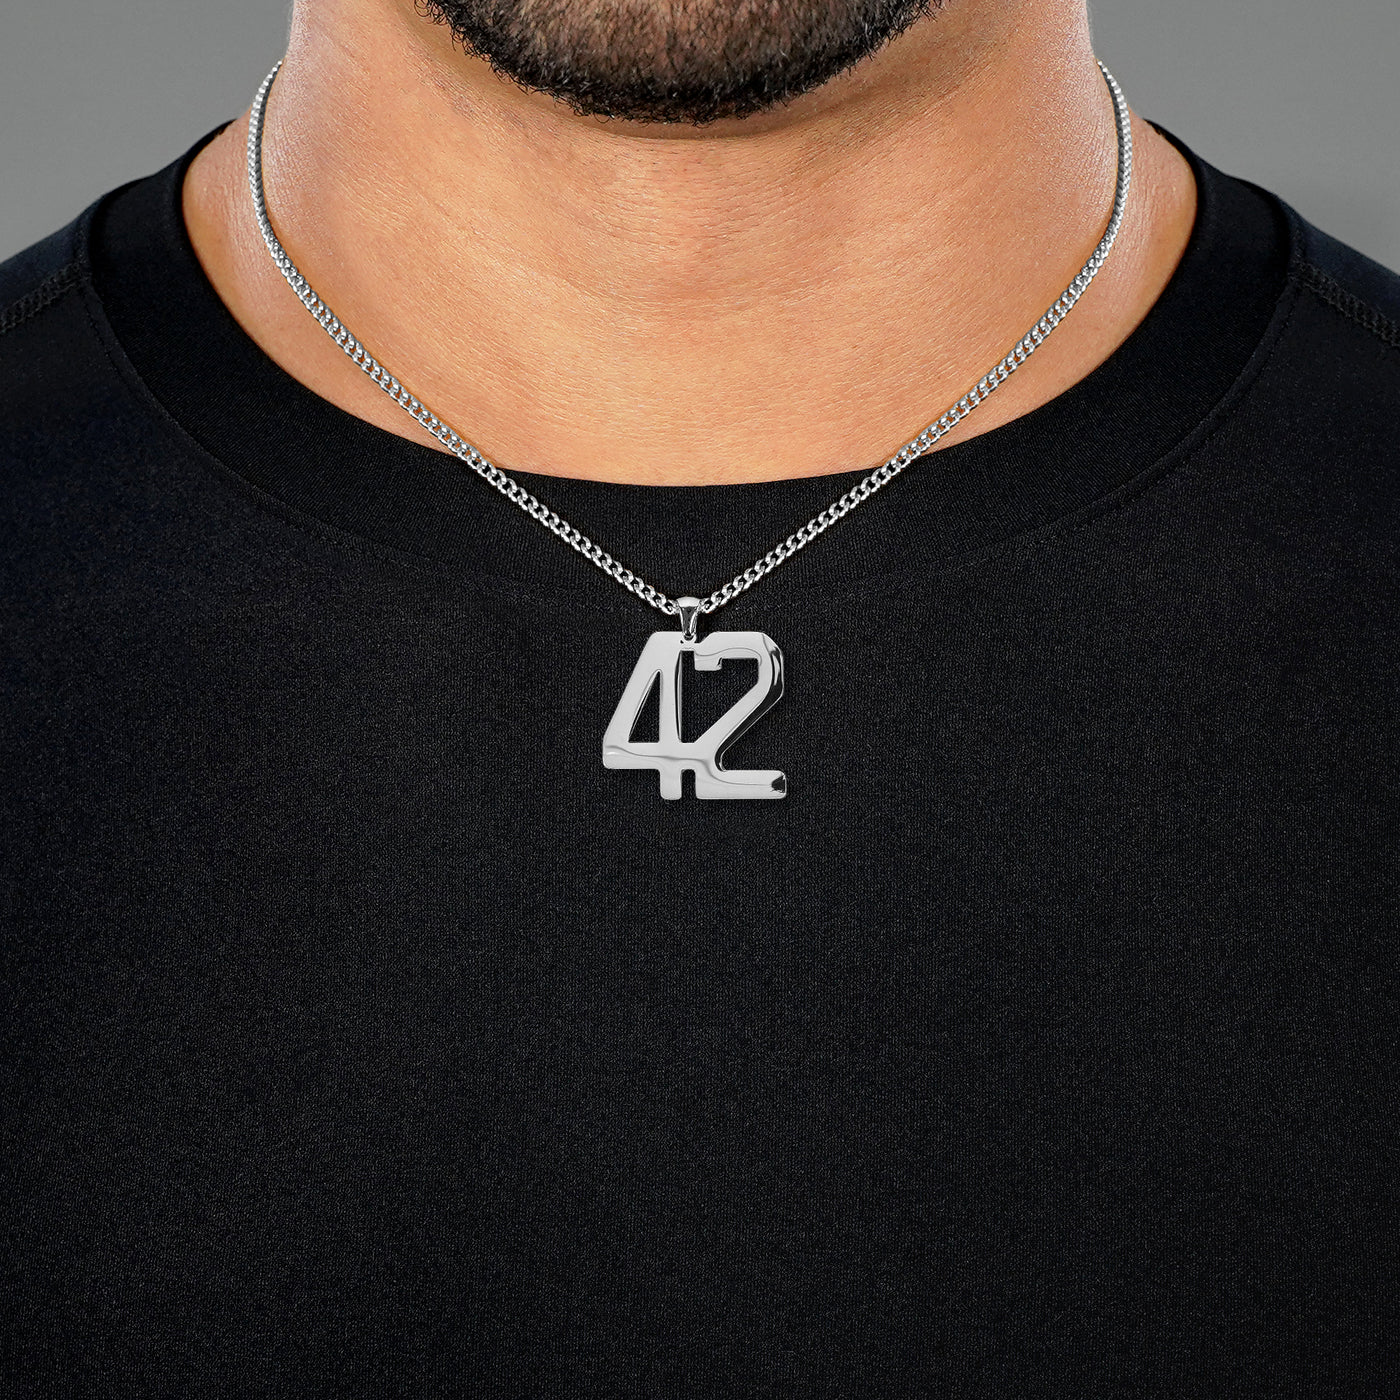 42 Number Pendant with Chain Necklace - Stainless Steel